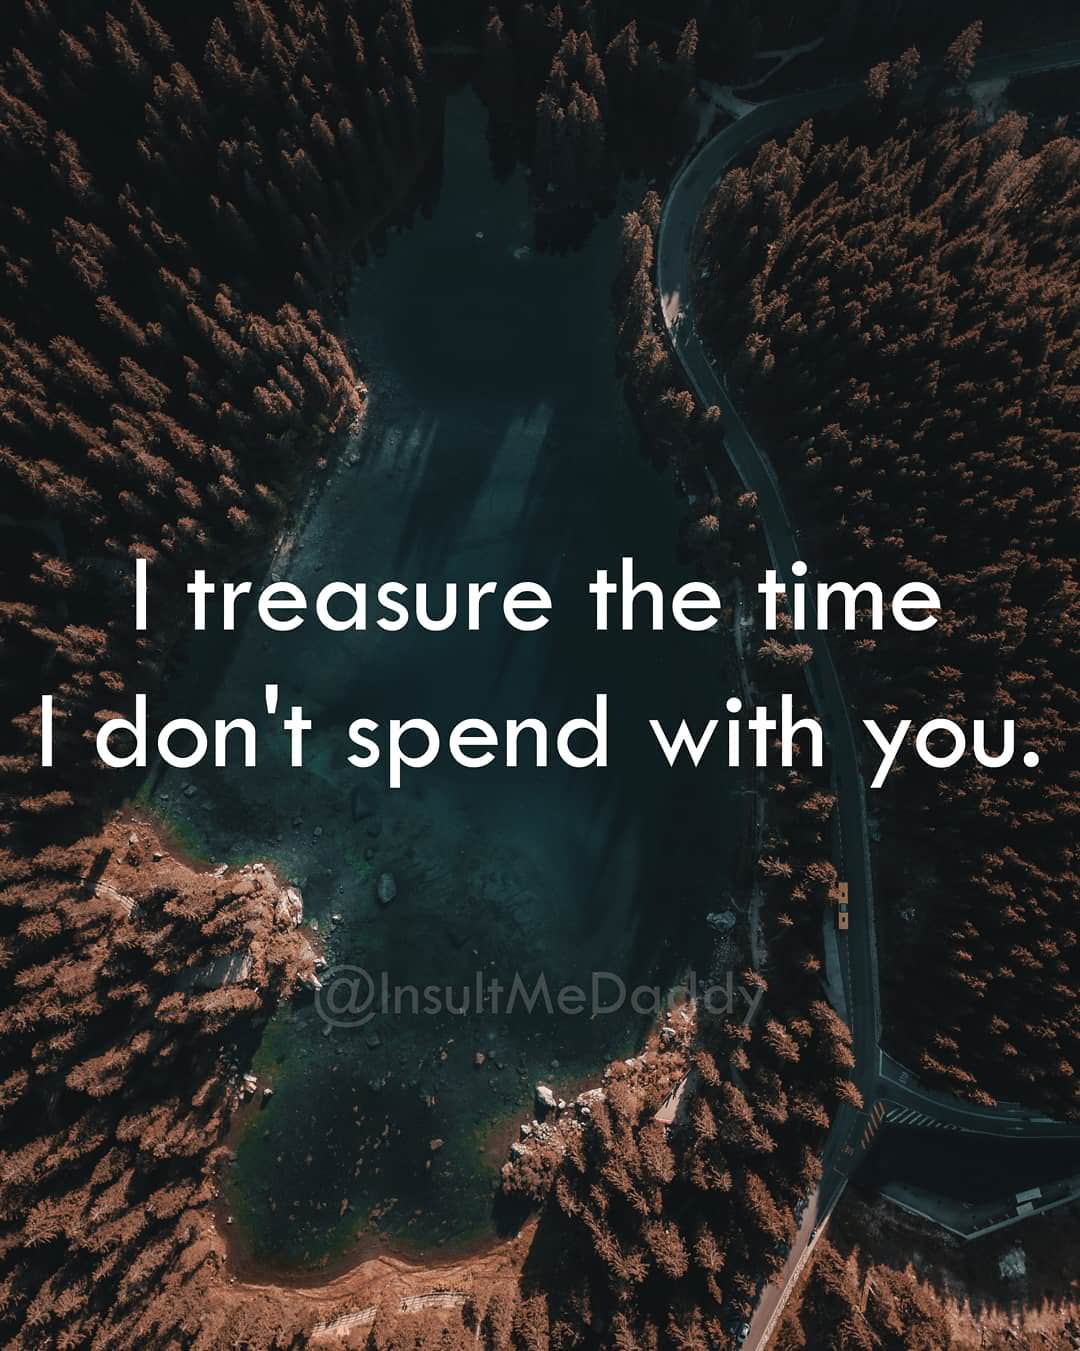 Insult - I treasure the time I don't spend with you. InsultMeDar